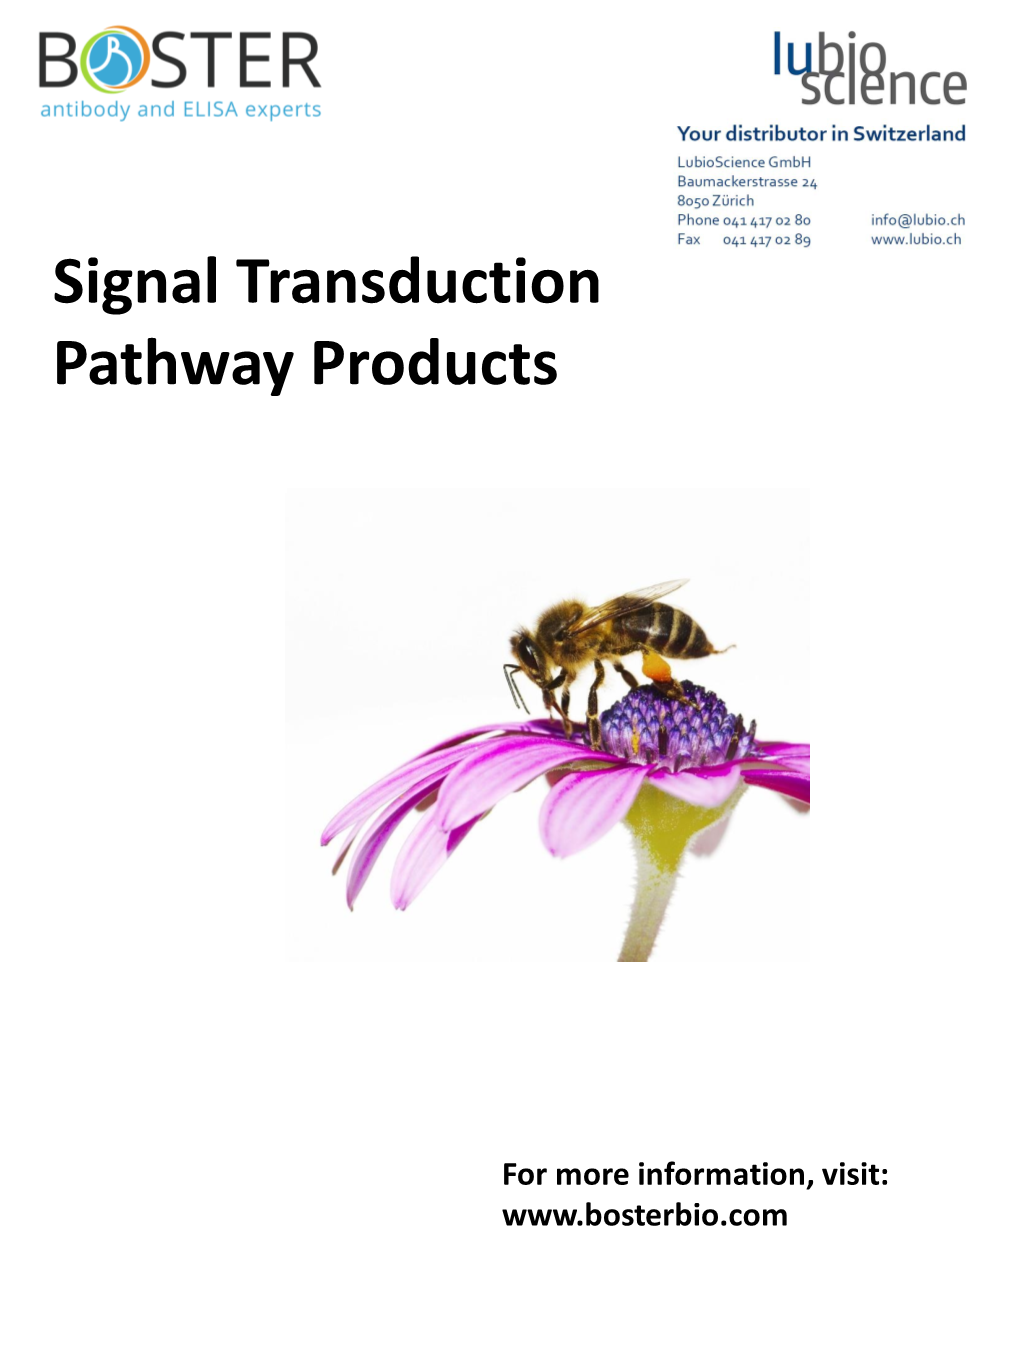 Signal Transduction Pathway Products